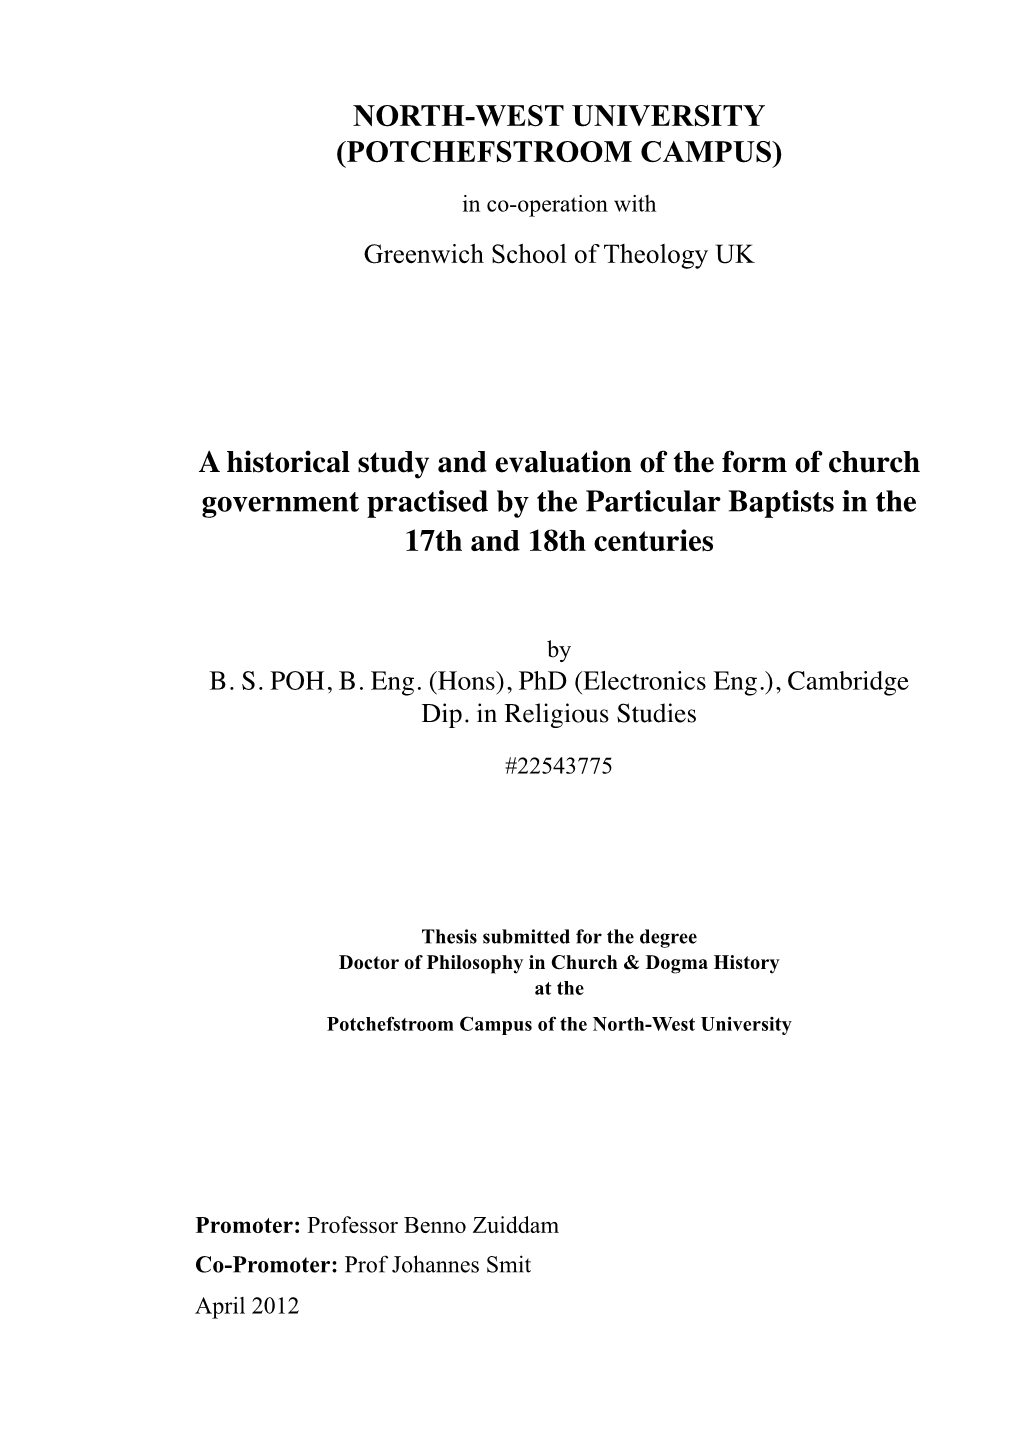 A Historical Study and Evaluation of the Form of Church Government Practised by the Particular Baptists in the 17Th and 18Th Centuries